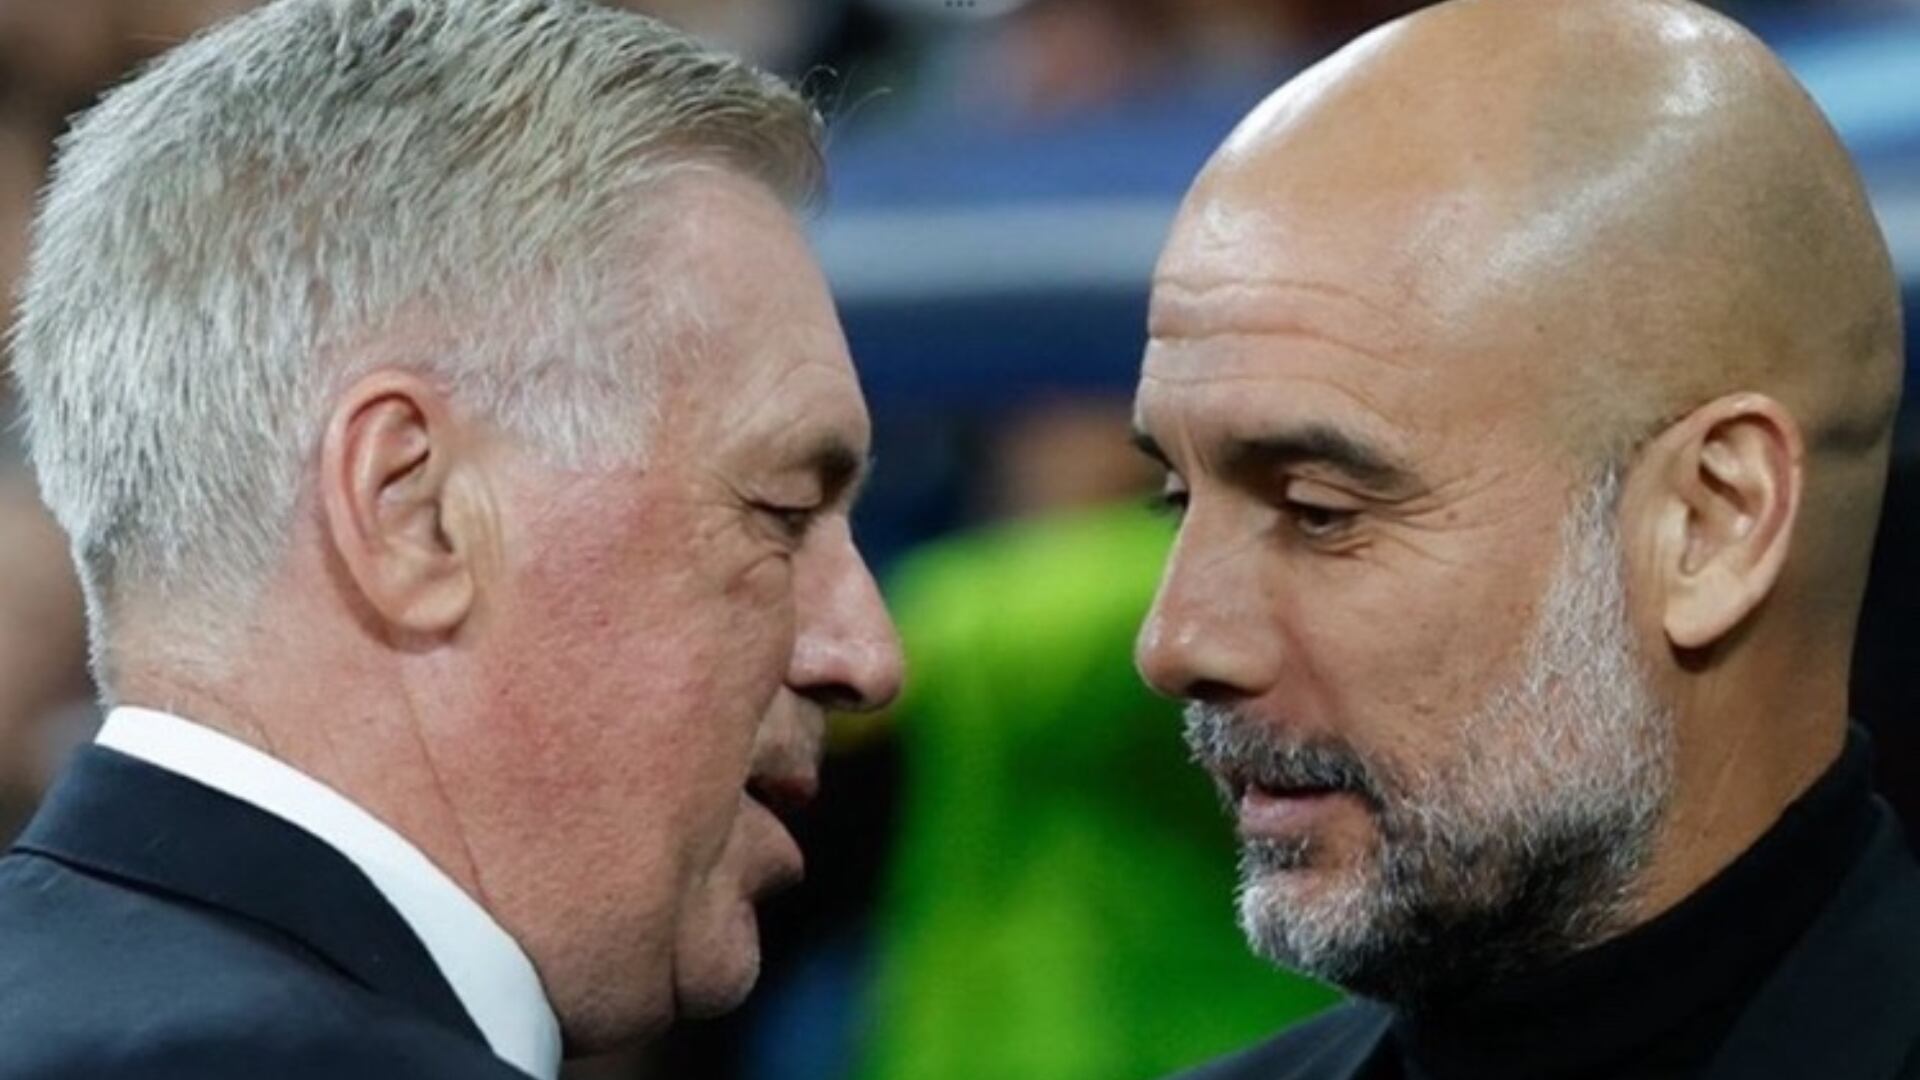 Ancelotti's declarations after the game and mentioned what Guardiola told him